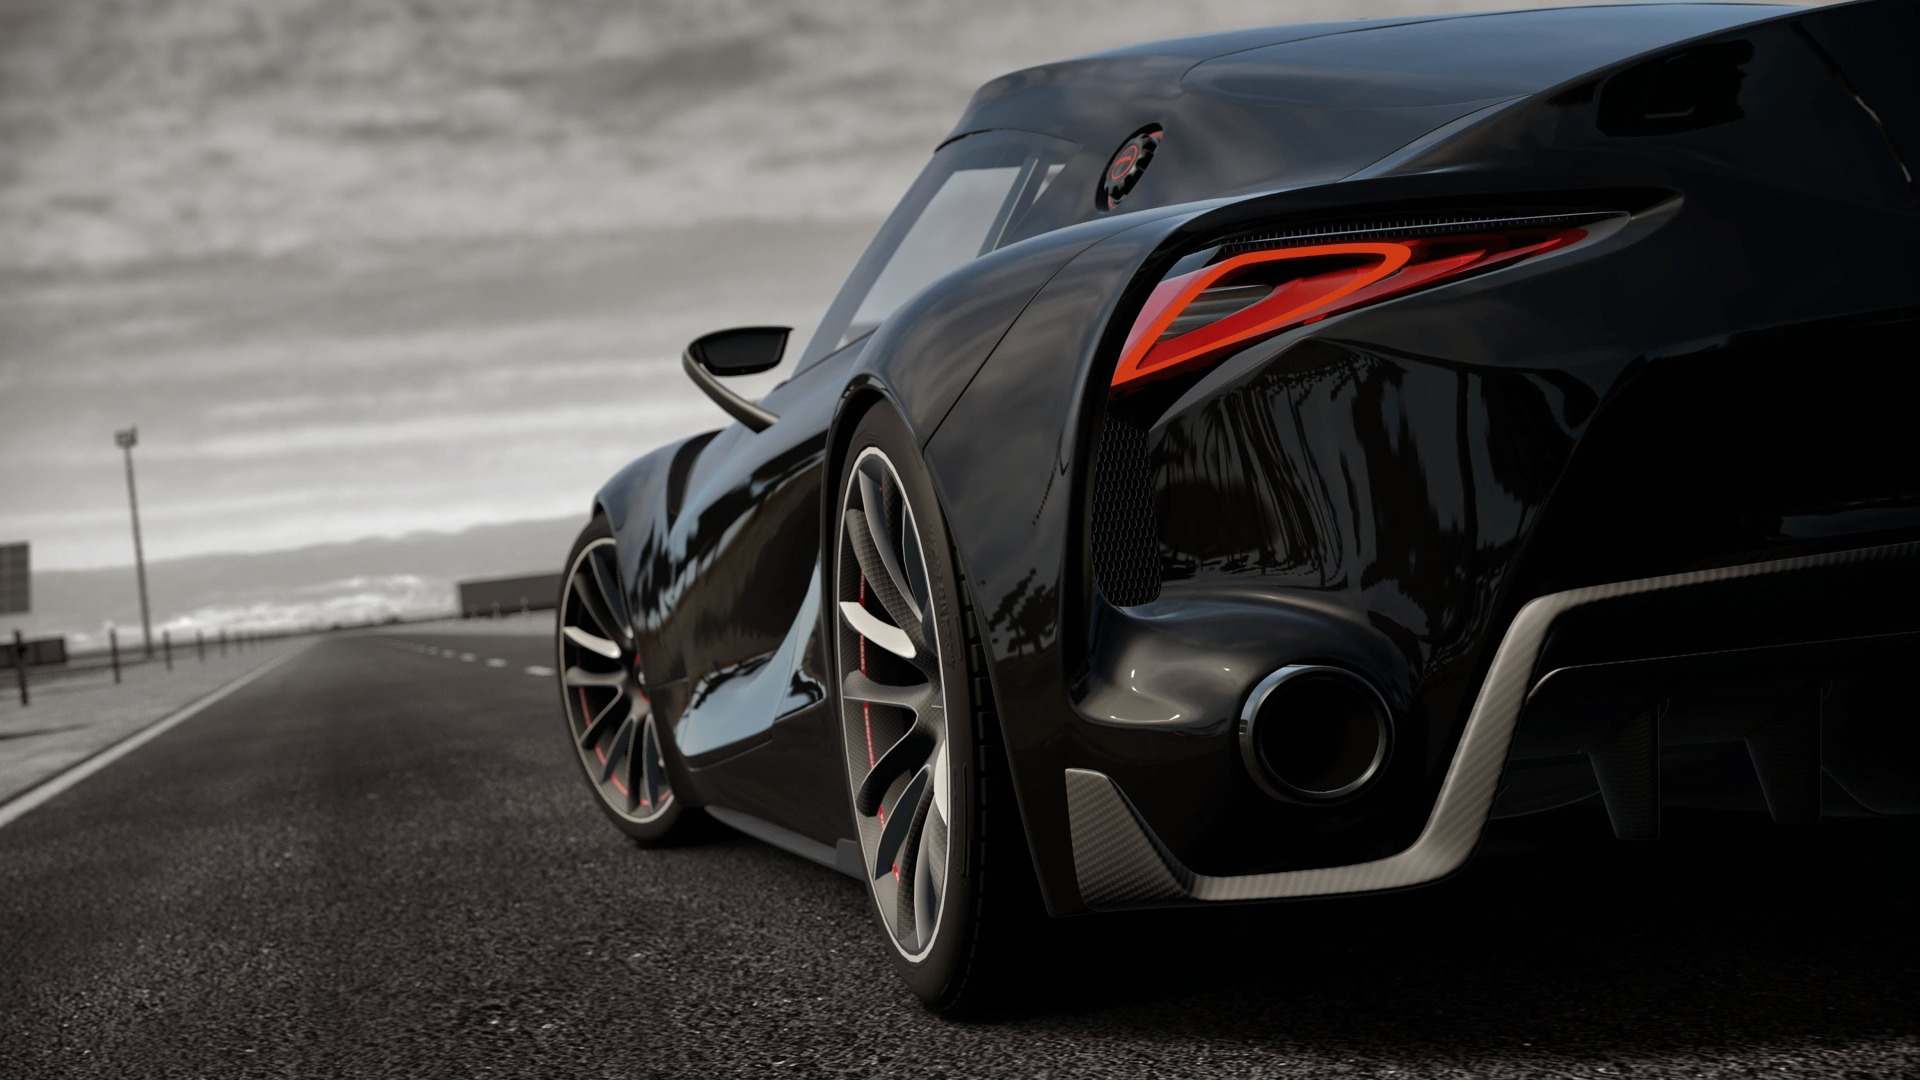 General 1920x1080 black car model BMW Toyota sky Toyota FT-1 clouds road rear view vehicle